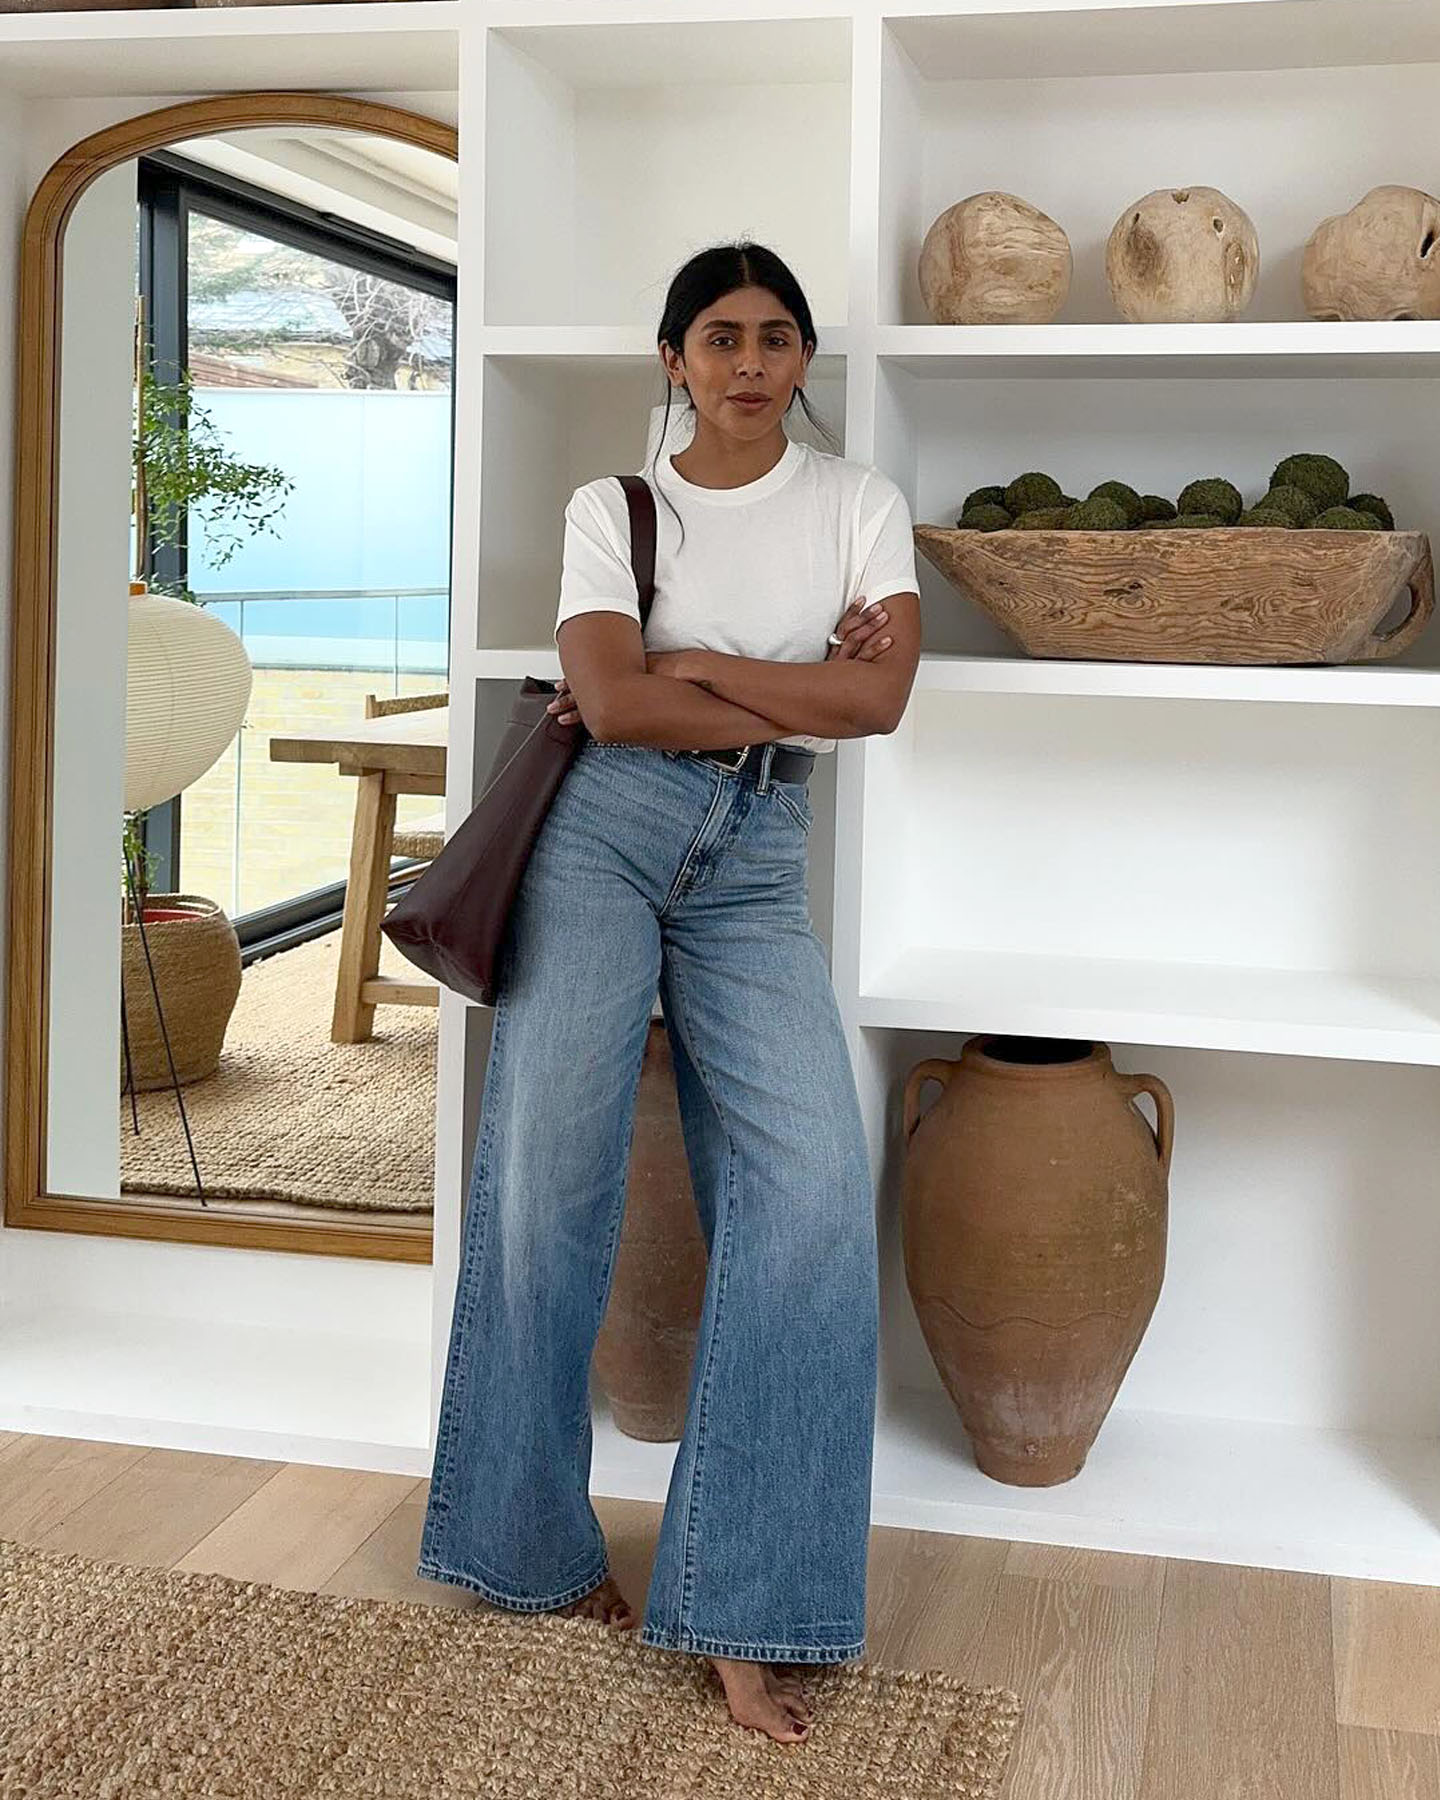 fashion influencer Monikh Dale poses in her modern London home wearing a casual outfit with a basic white t-shirt, black belt, high-waisted wide-leg jeans, and a large brown tote bag